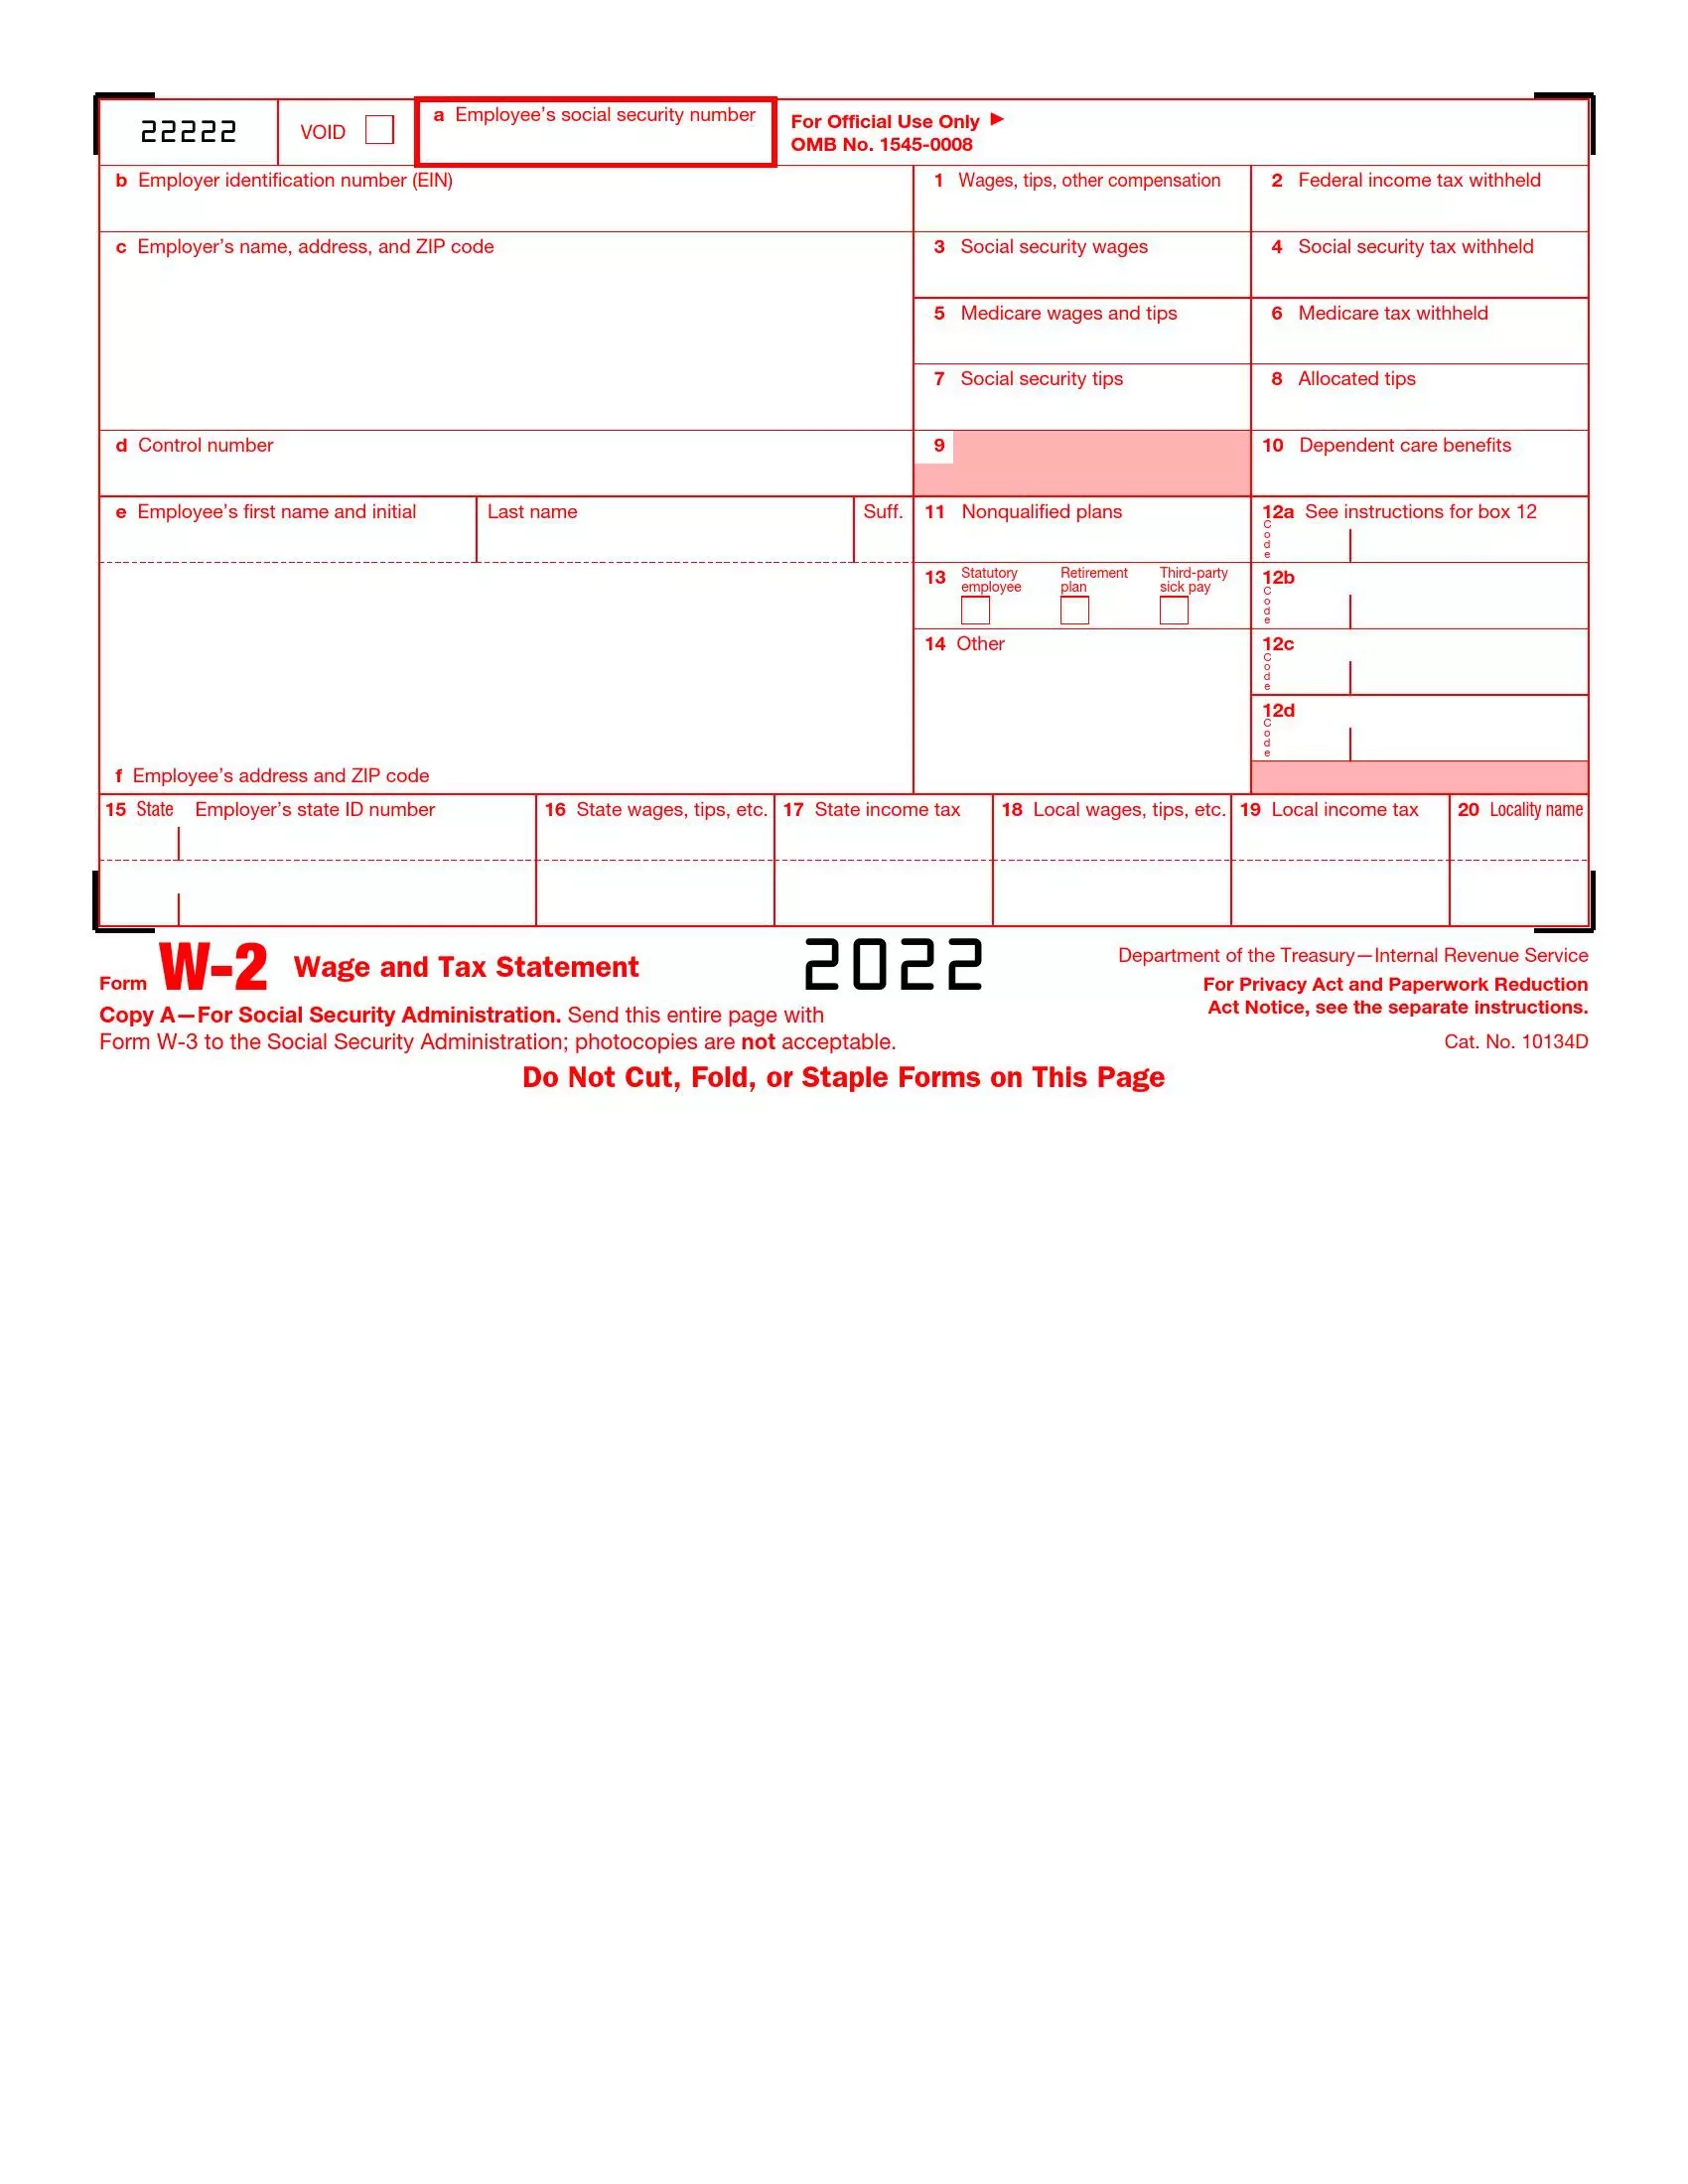 Irs Form W-2 ≡ Fill Out Printable Pdf Forms Online with regard to Irs W2 Form 2022 Pdf